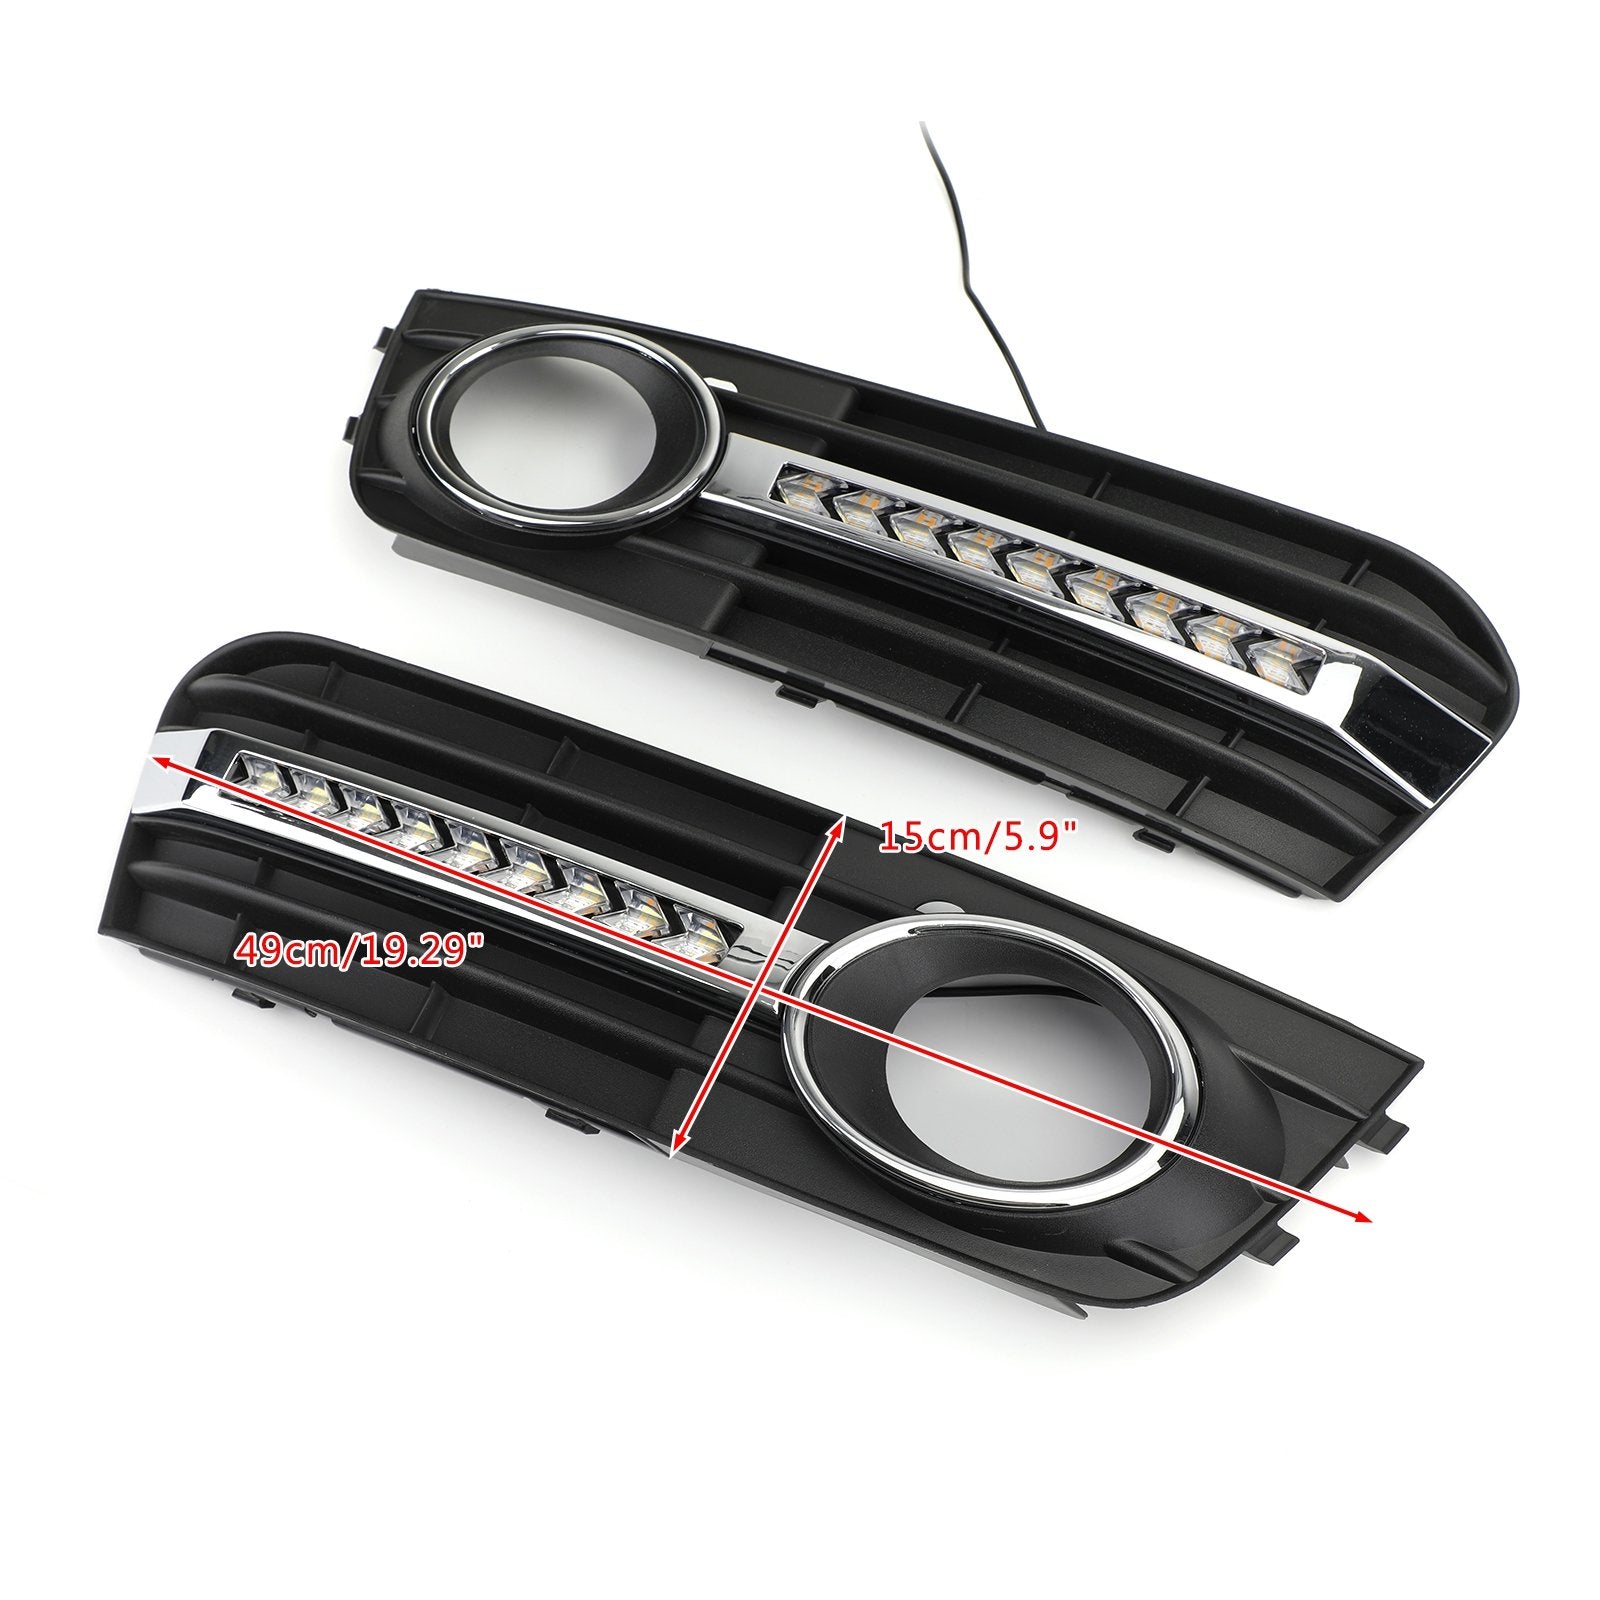 2x Flowing LED Fog Light Cover Mesh Grille Turn Signal Lamp Fits 2009-2011 AUDI A4 B8 Generic